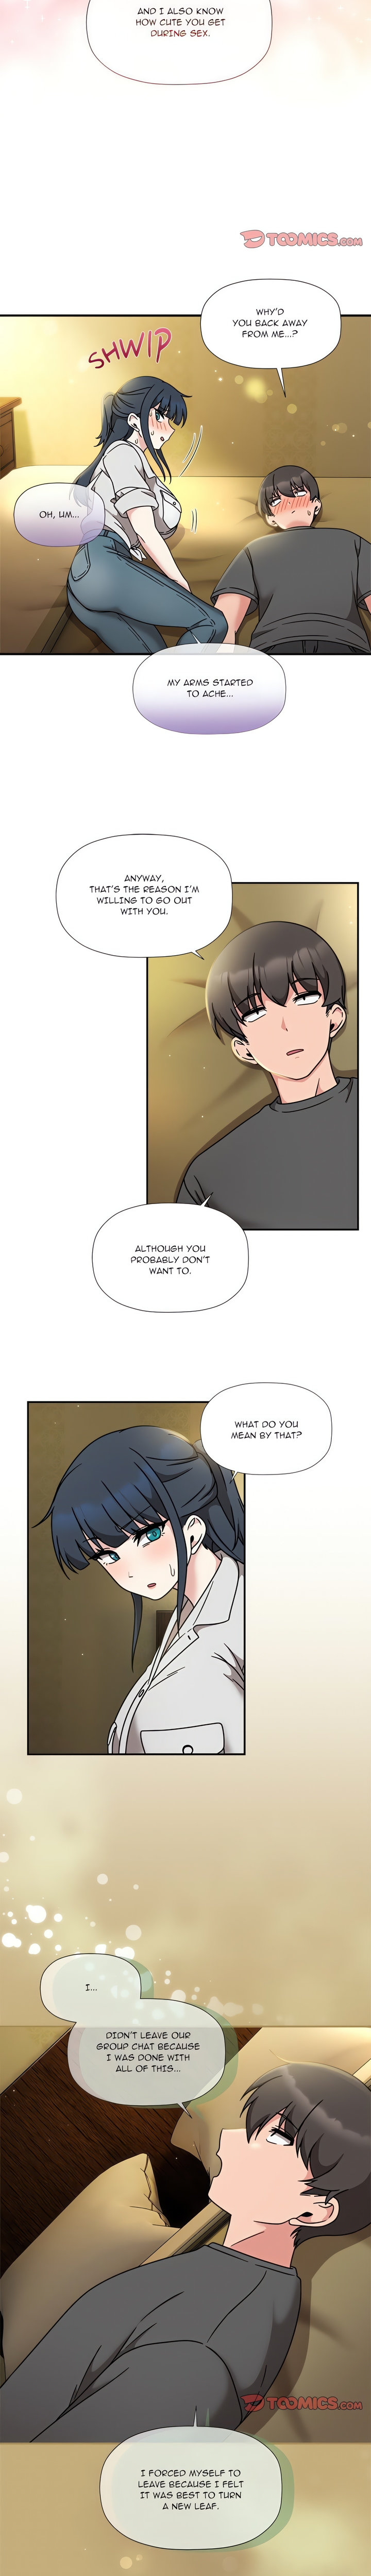 #Follow Me Chapter 58 - Page 2